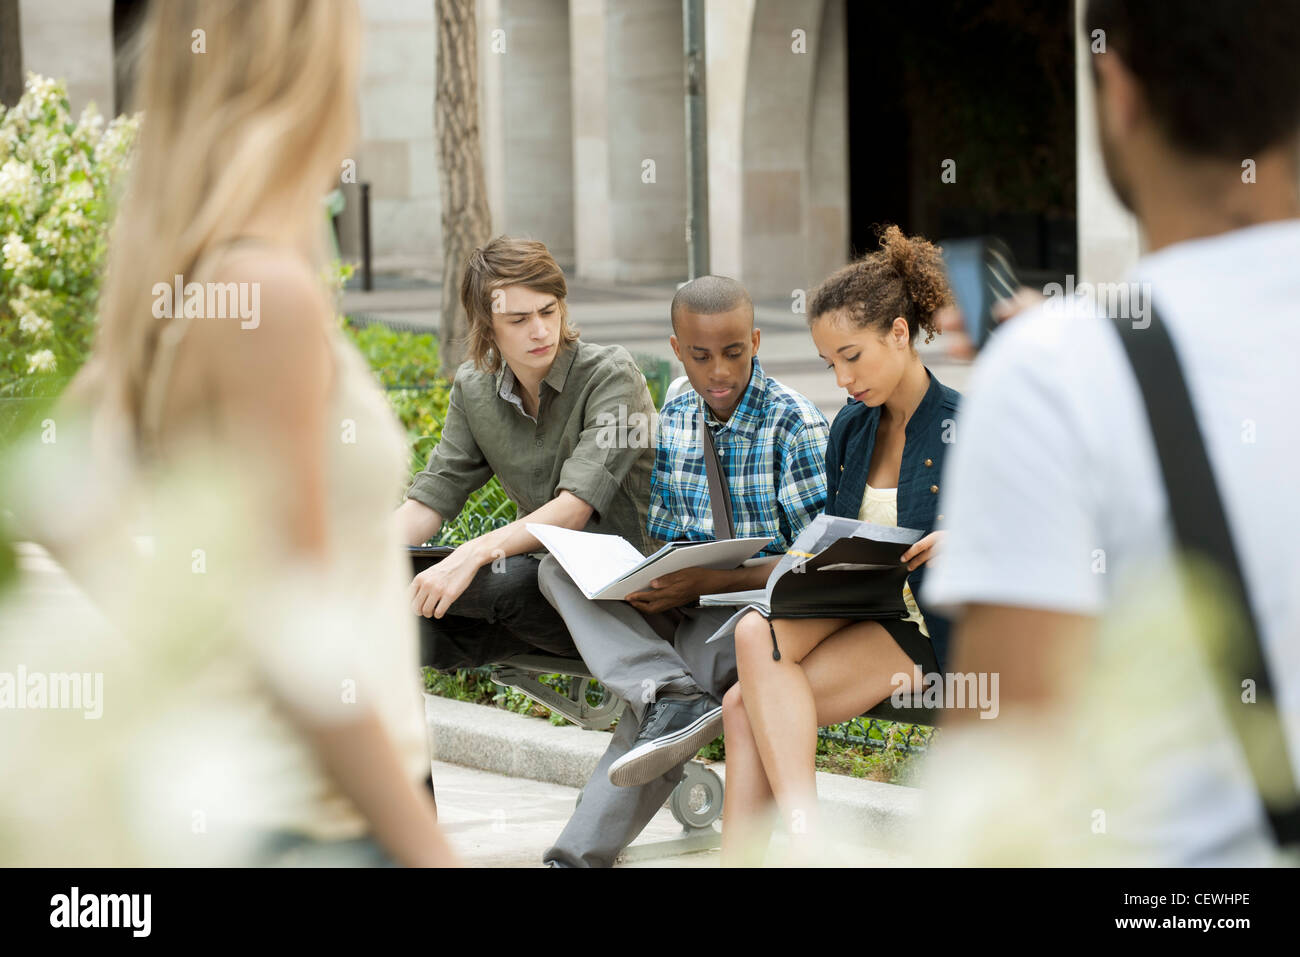 University students studying on campus, people in foreground Stock Photo